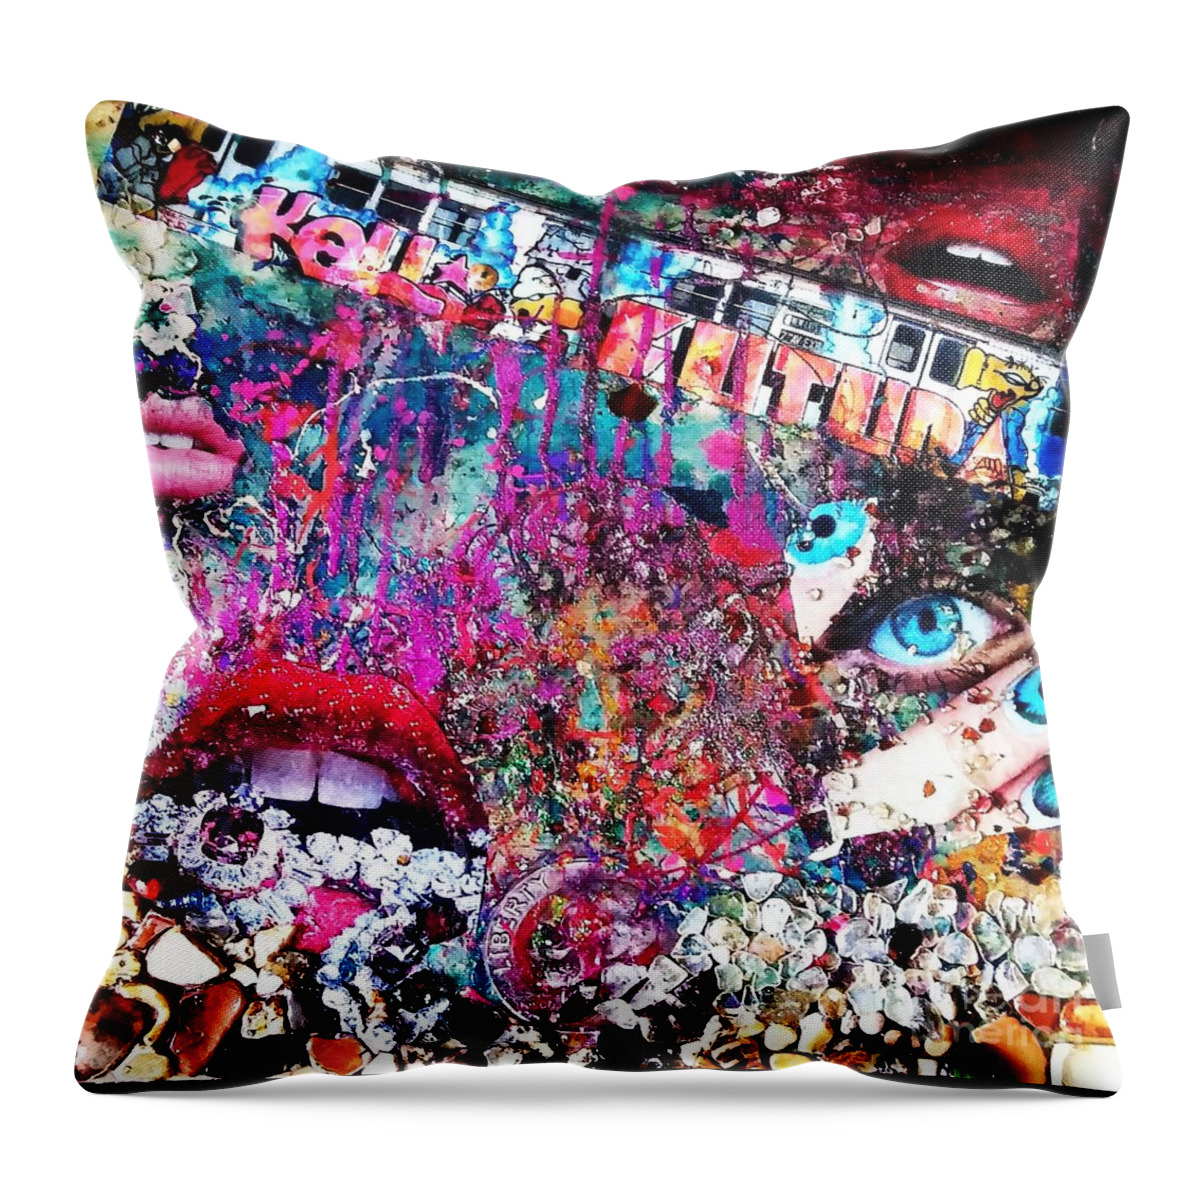  Throw Pillow featuring the mixed media Mouthful by Milisa Miner